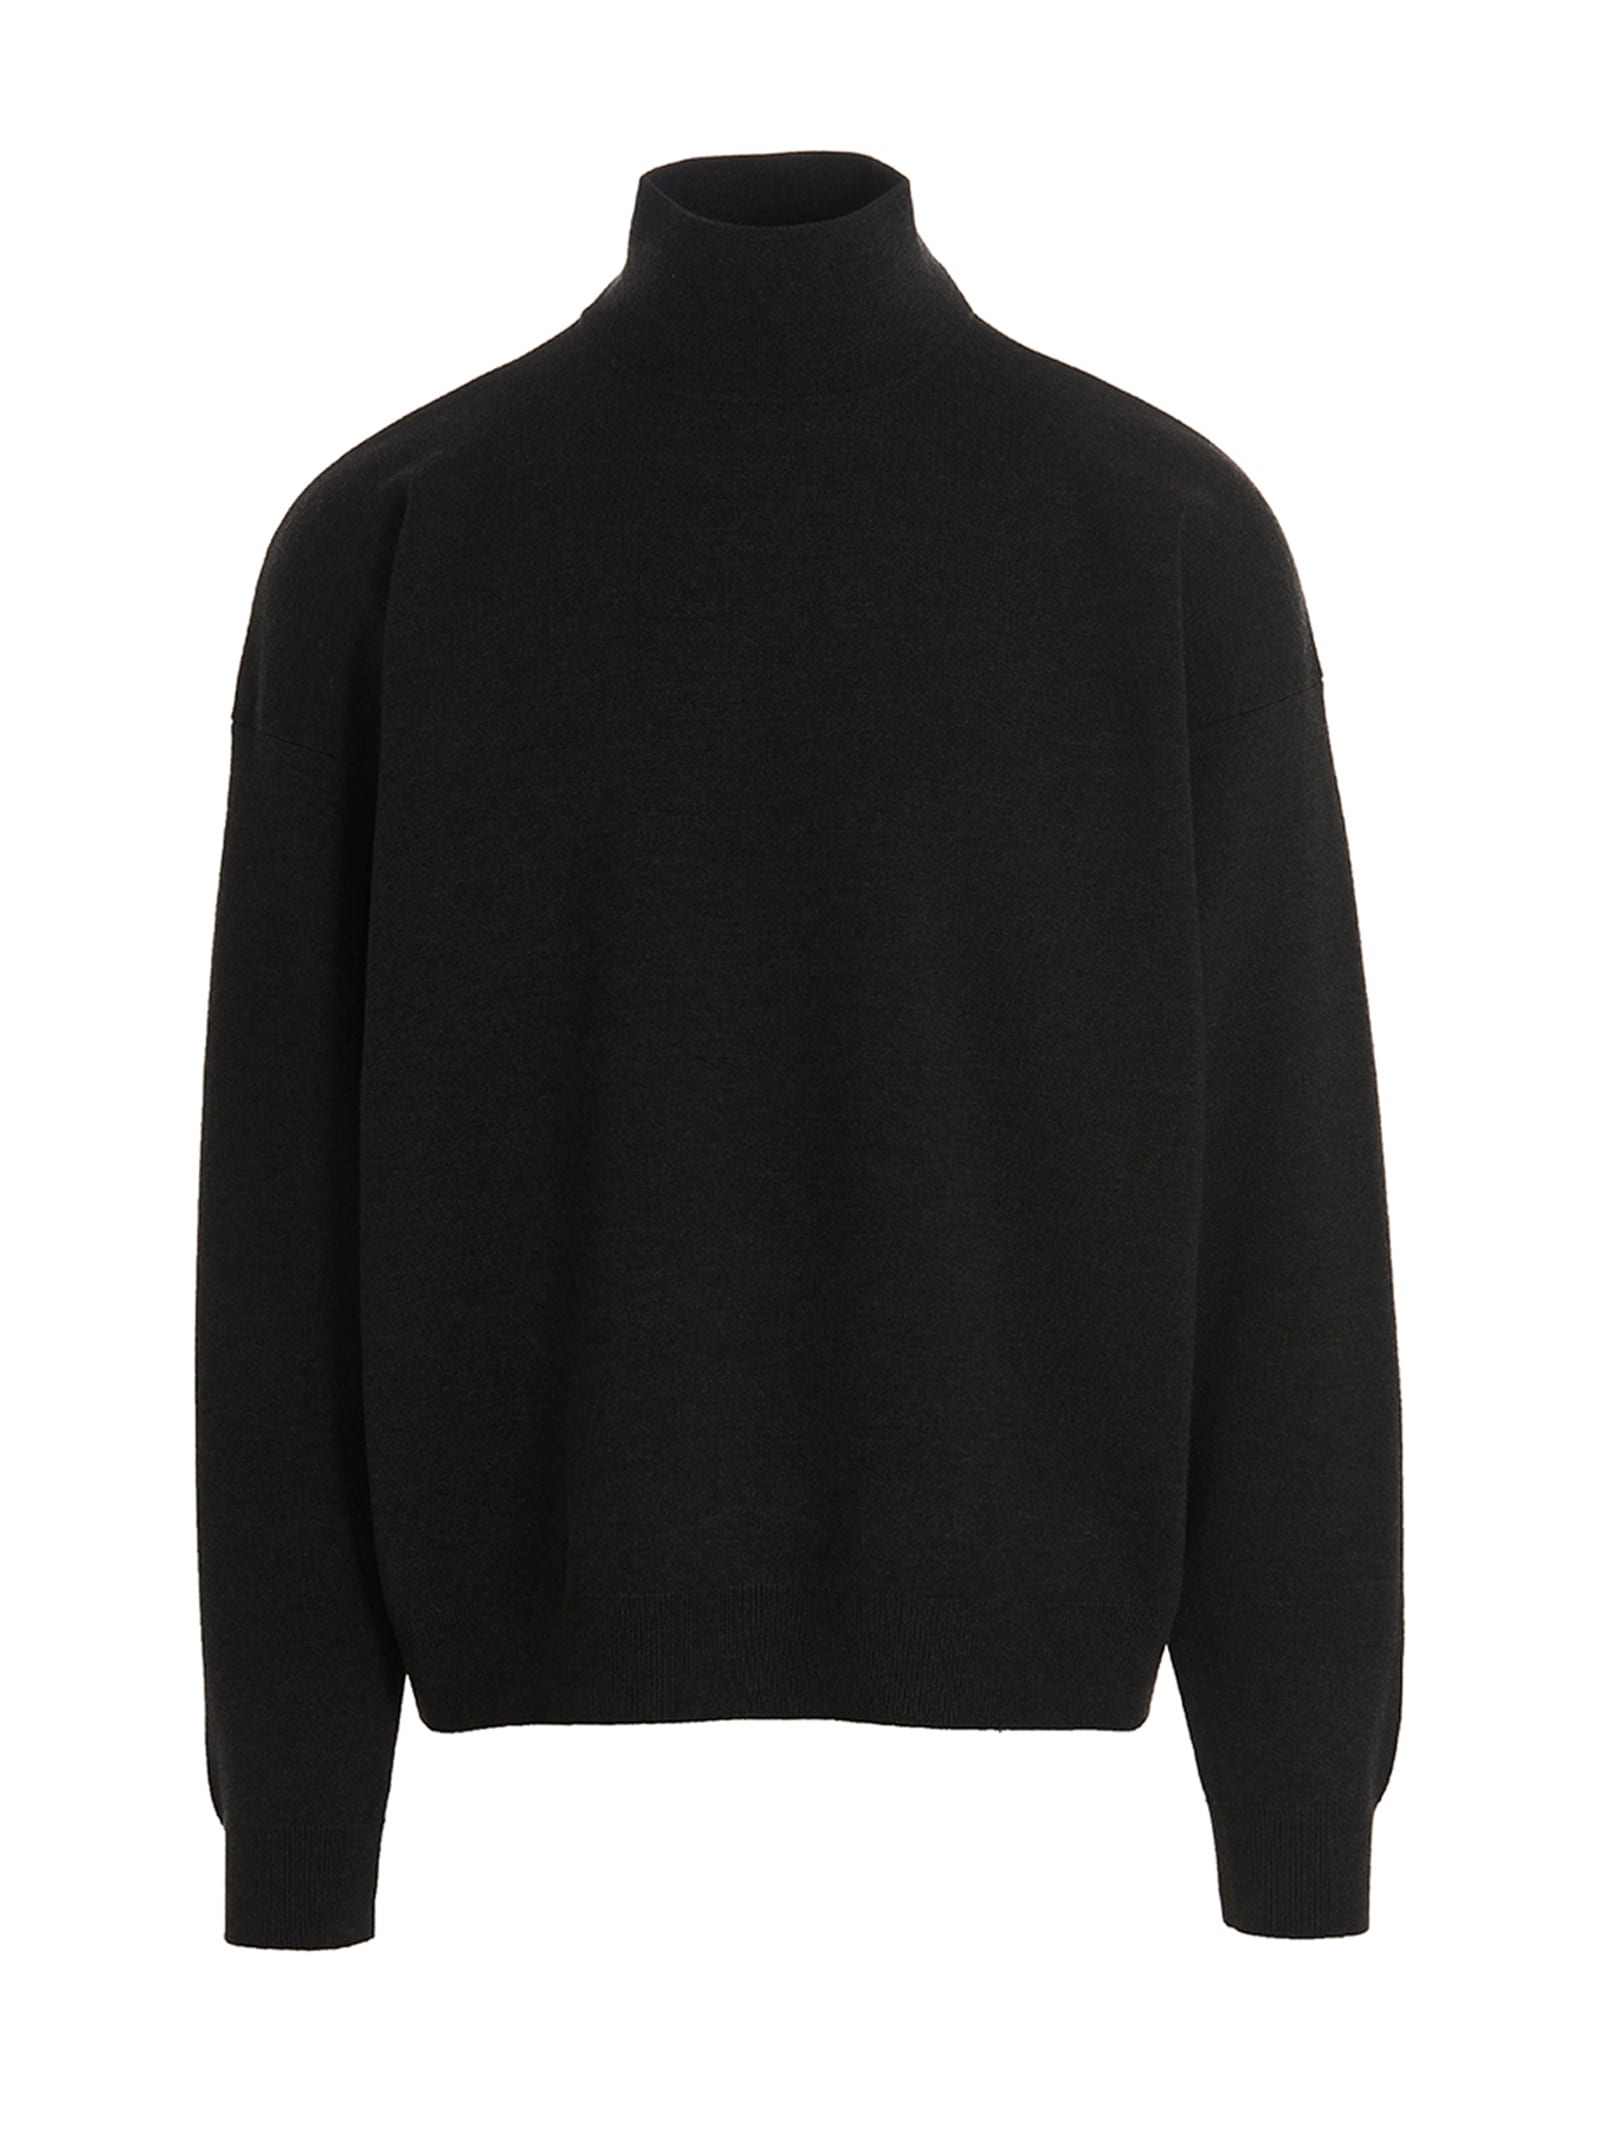 Fear of God High Neck Sweater